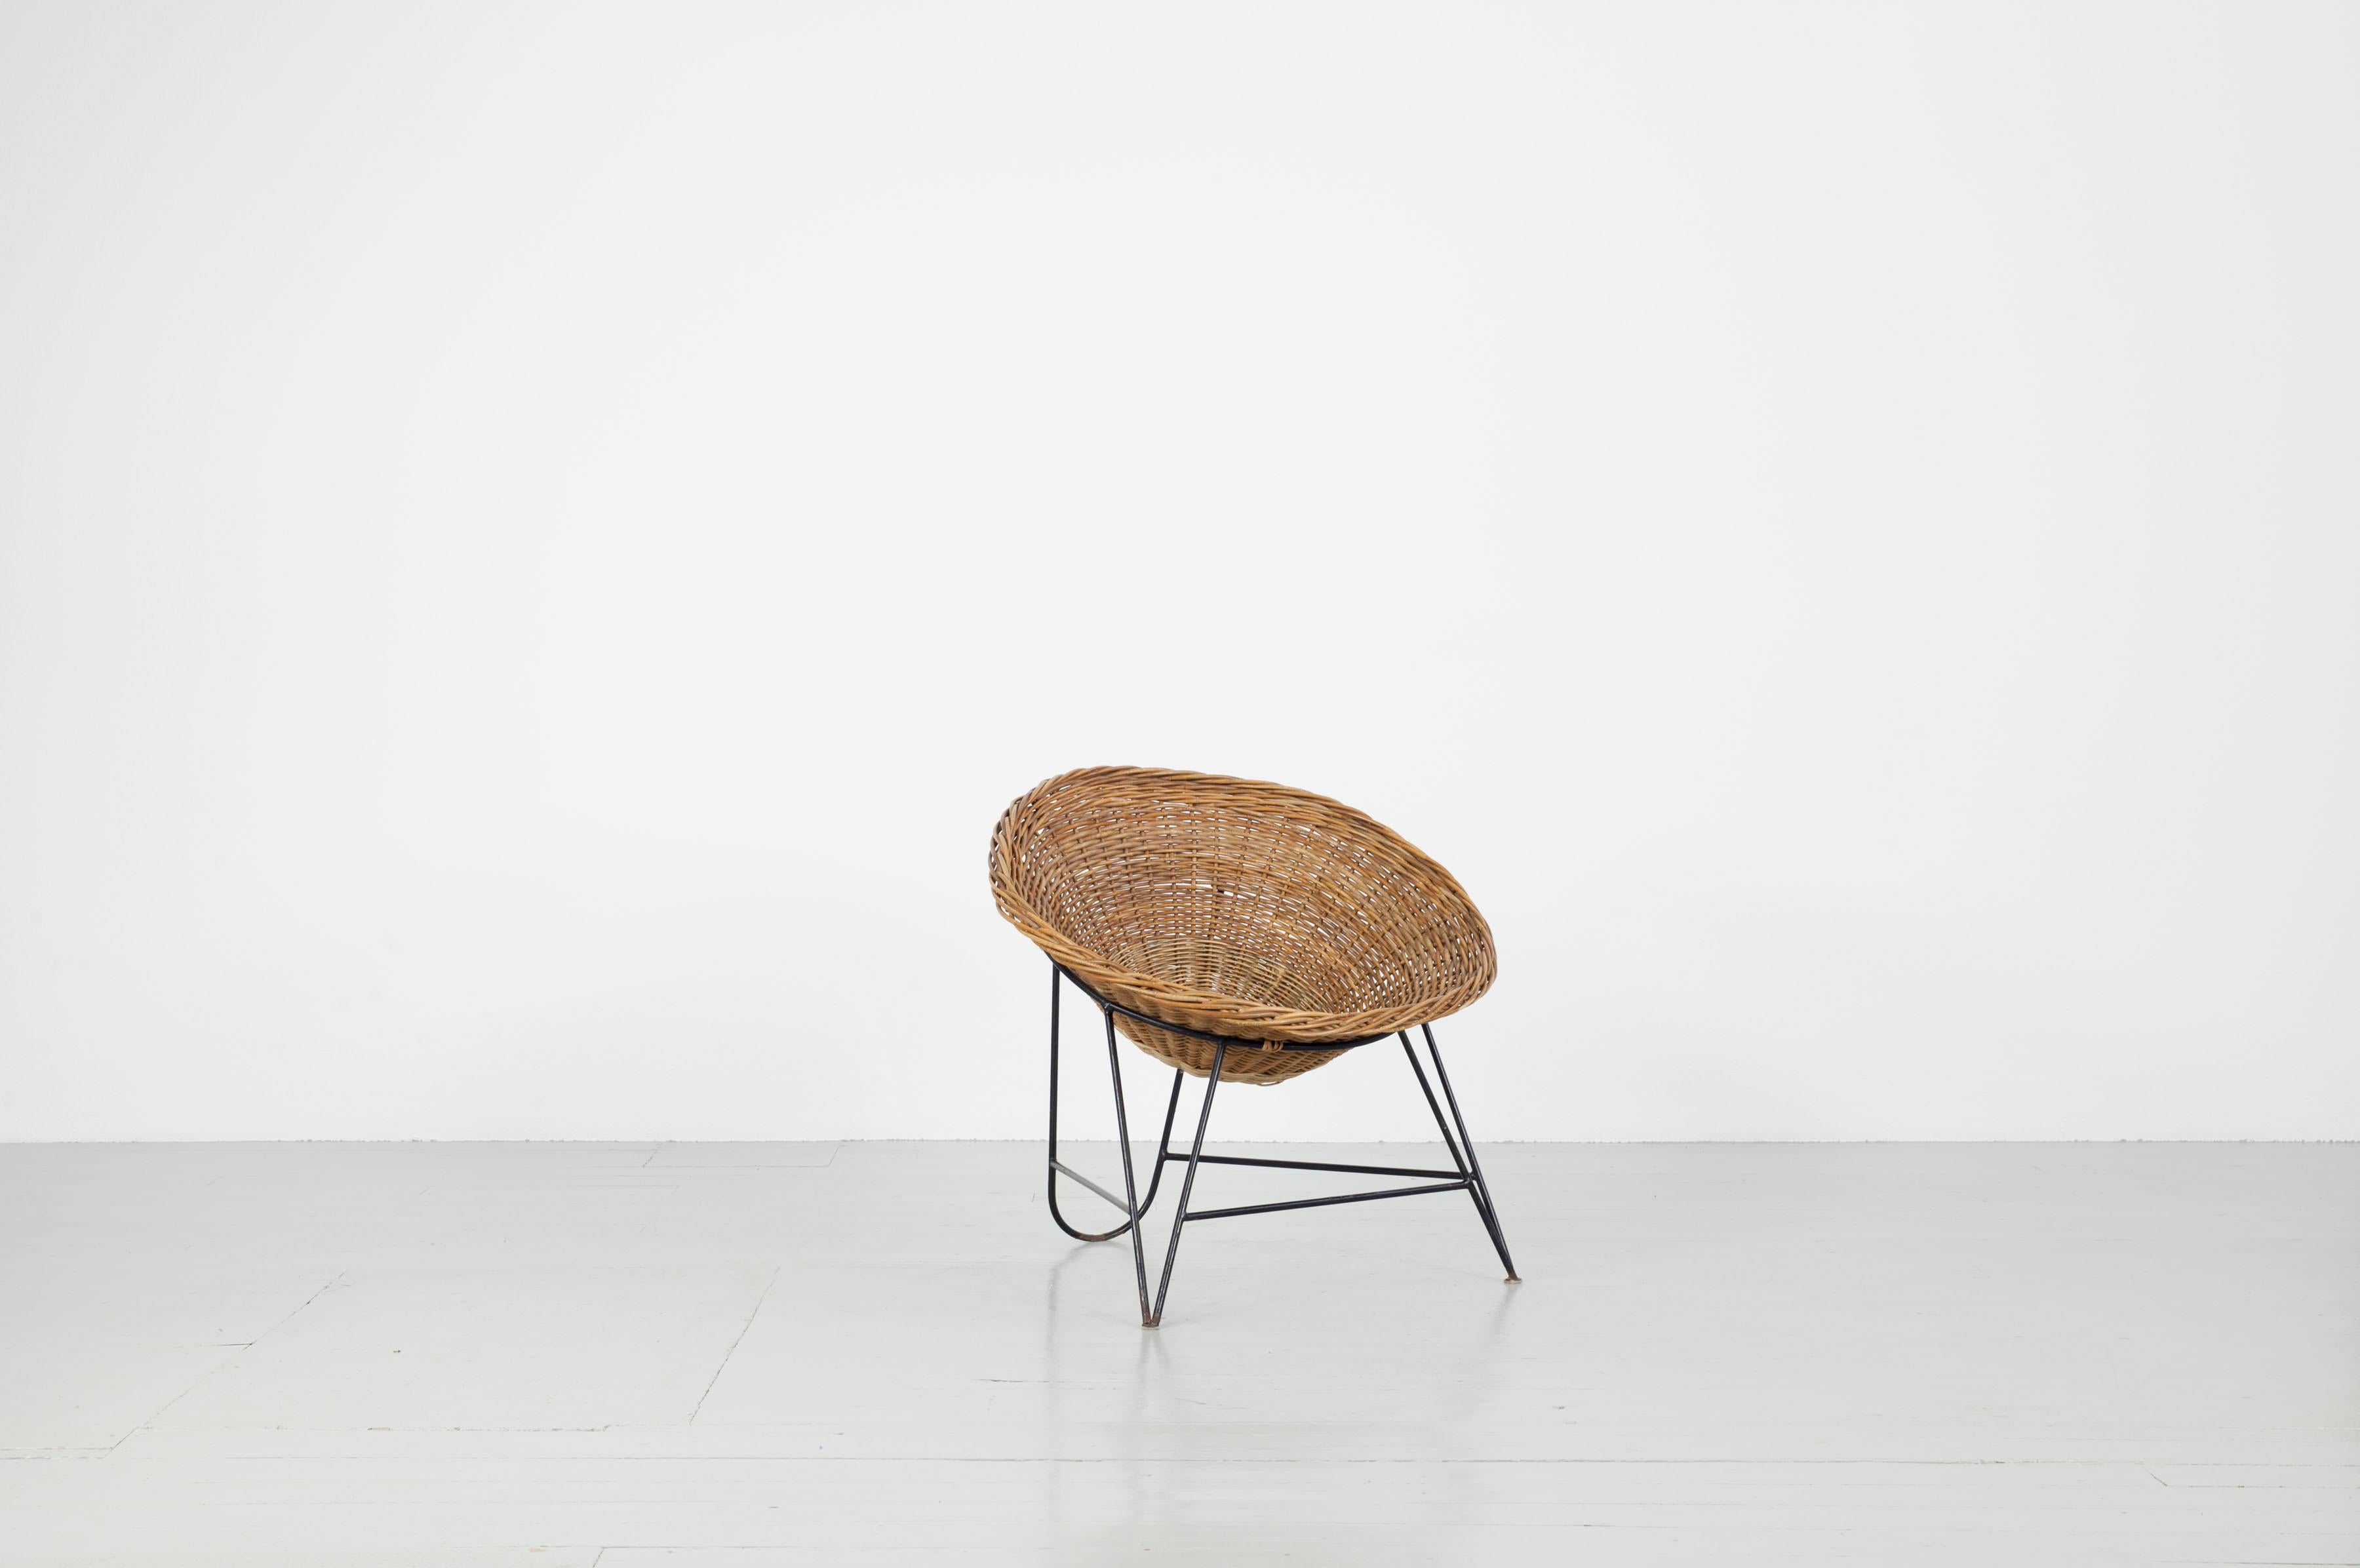 Rattan basket chair, Italy, 1950s. The chairs are often described as coconut-shaped. The feature a rattan seat shell and a base of lacquered iron.